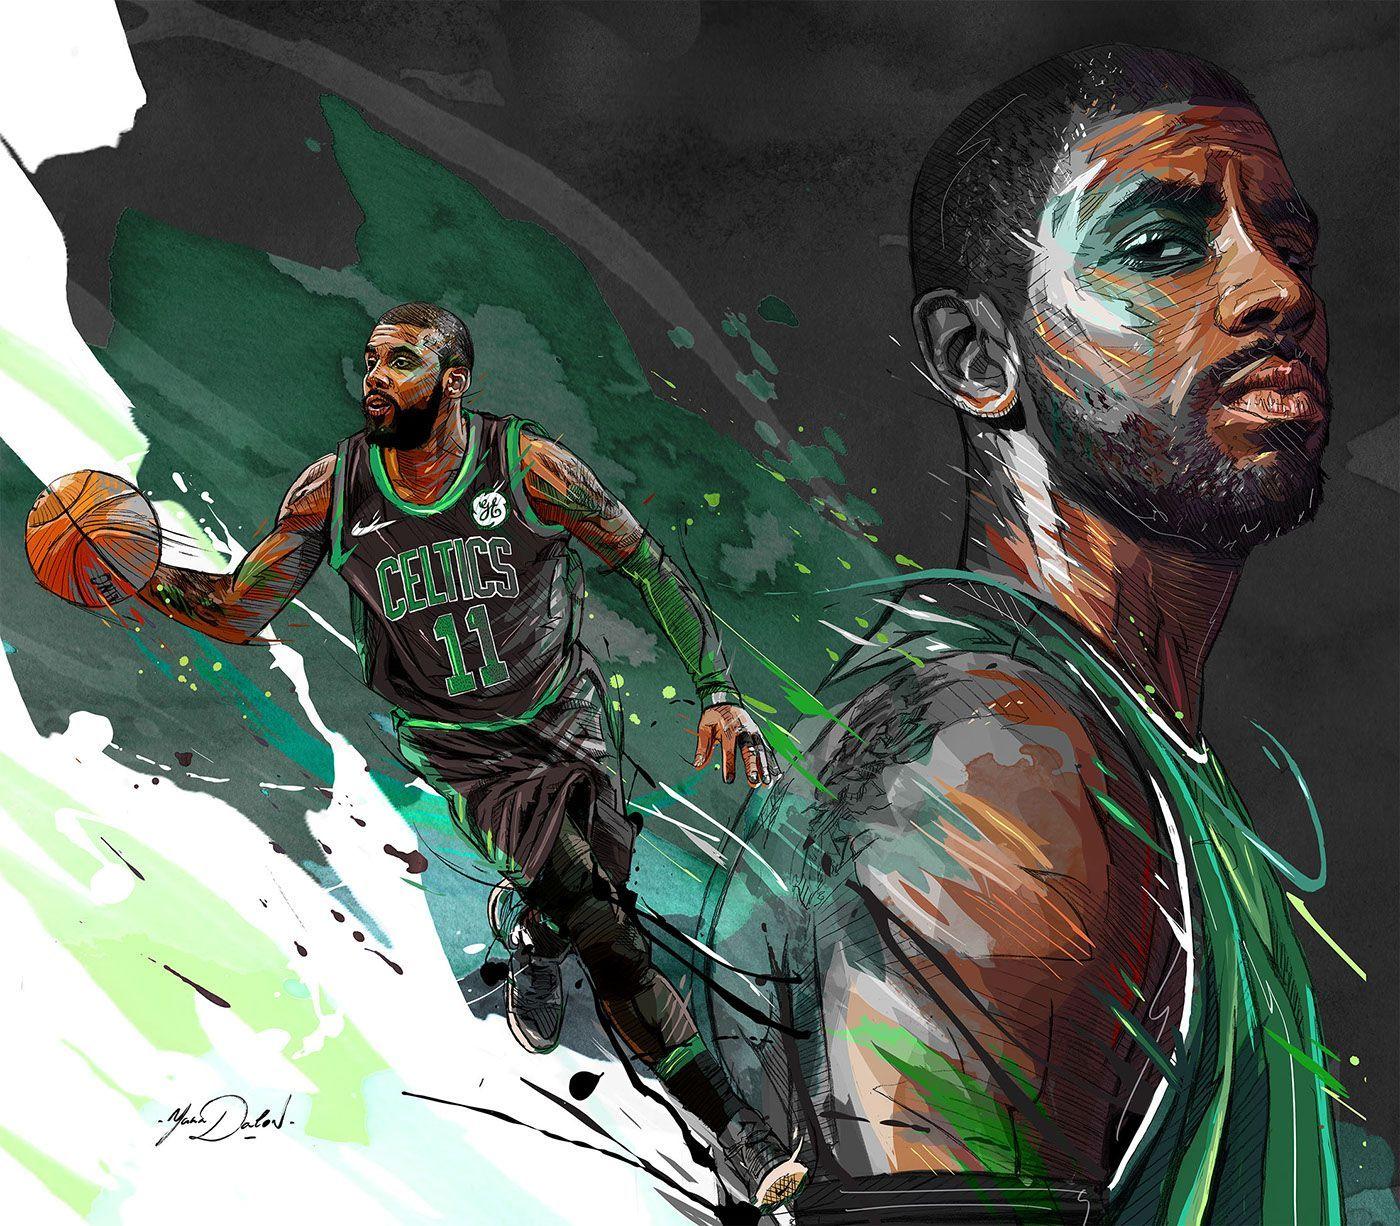 My painting of the famous player of the Boston Celtics, Kyrie Irving.